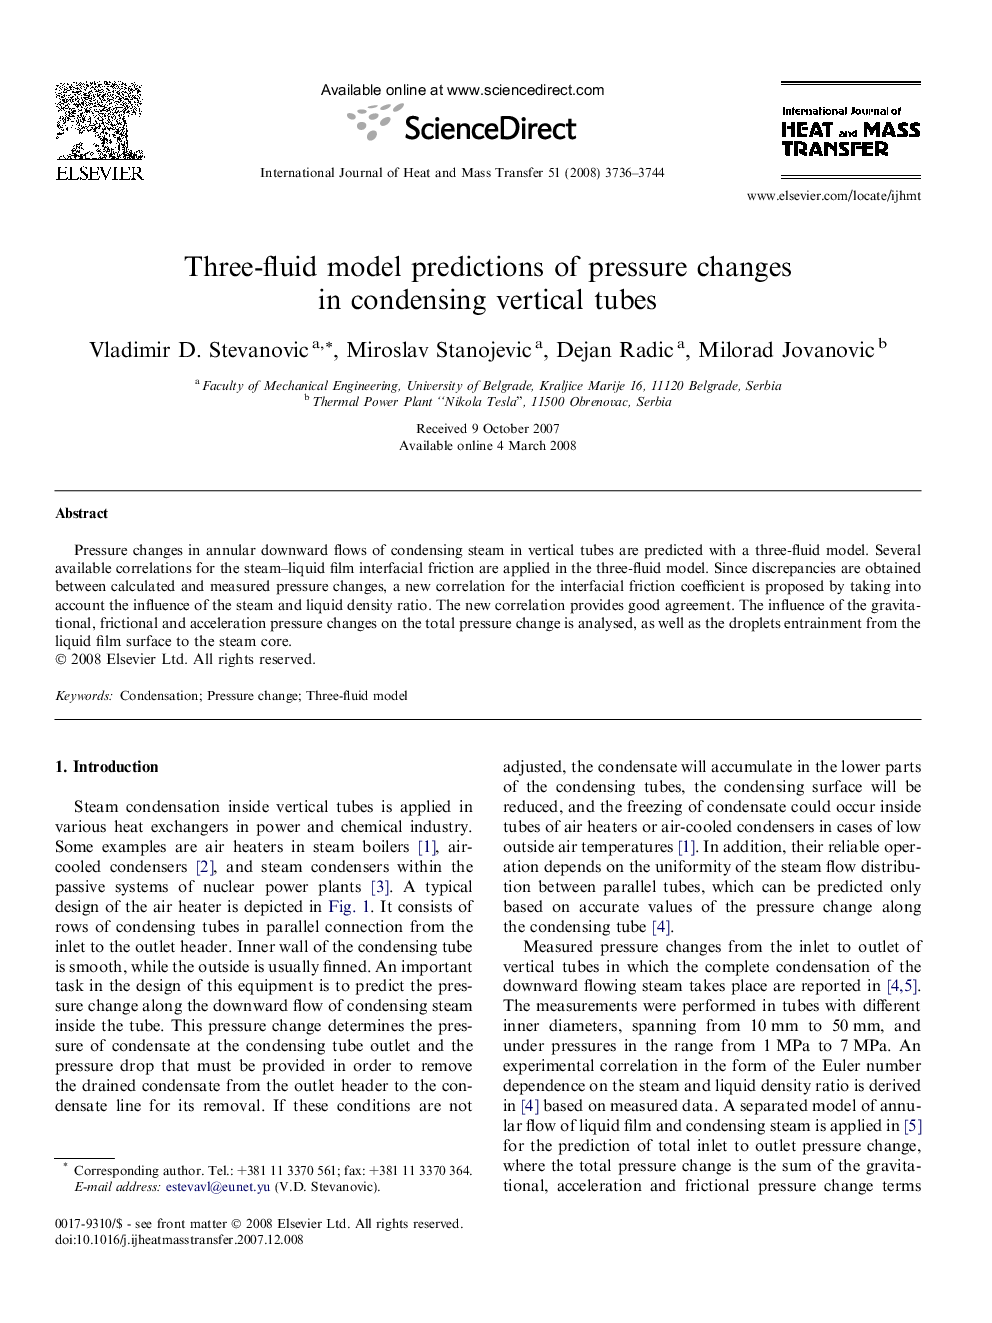 Three-fluid model predictions of pressure changes in condensing vertical tubes